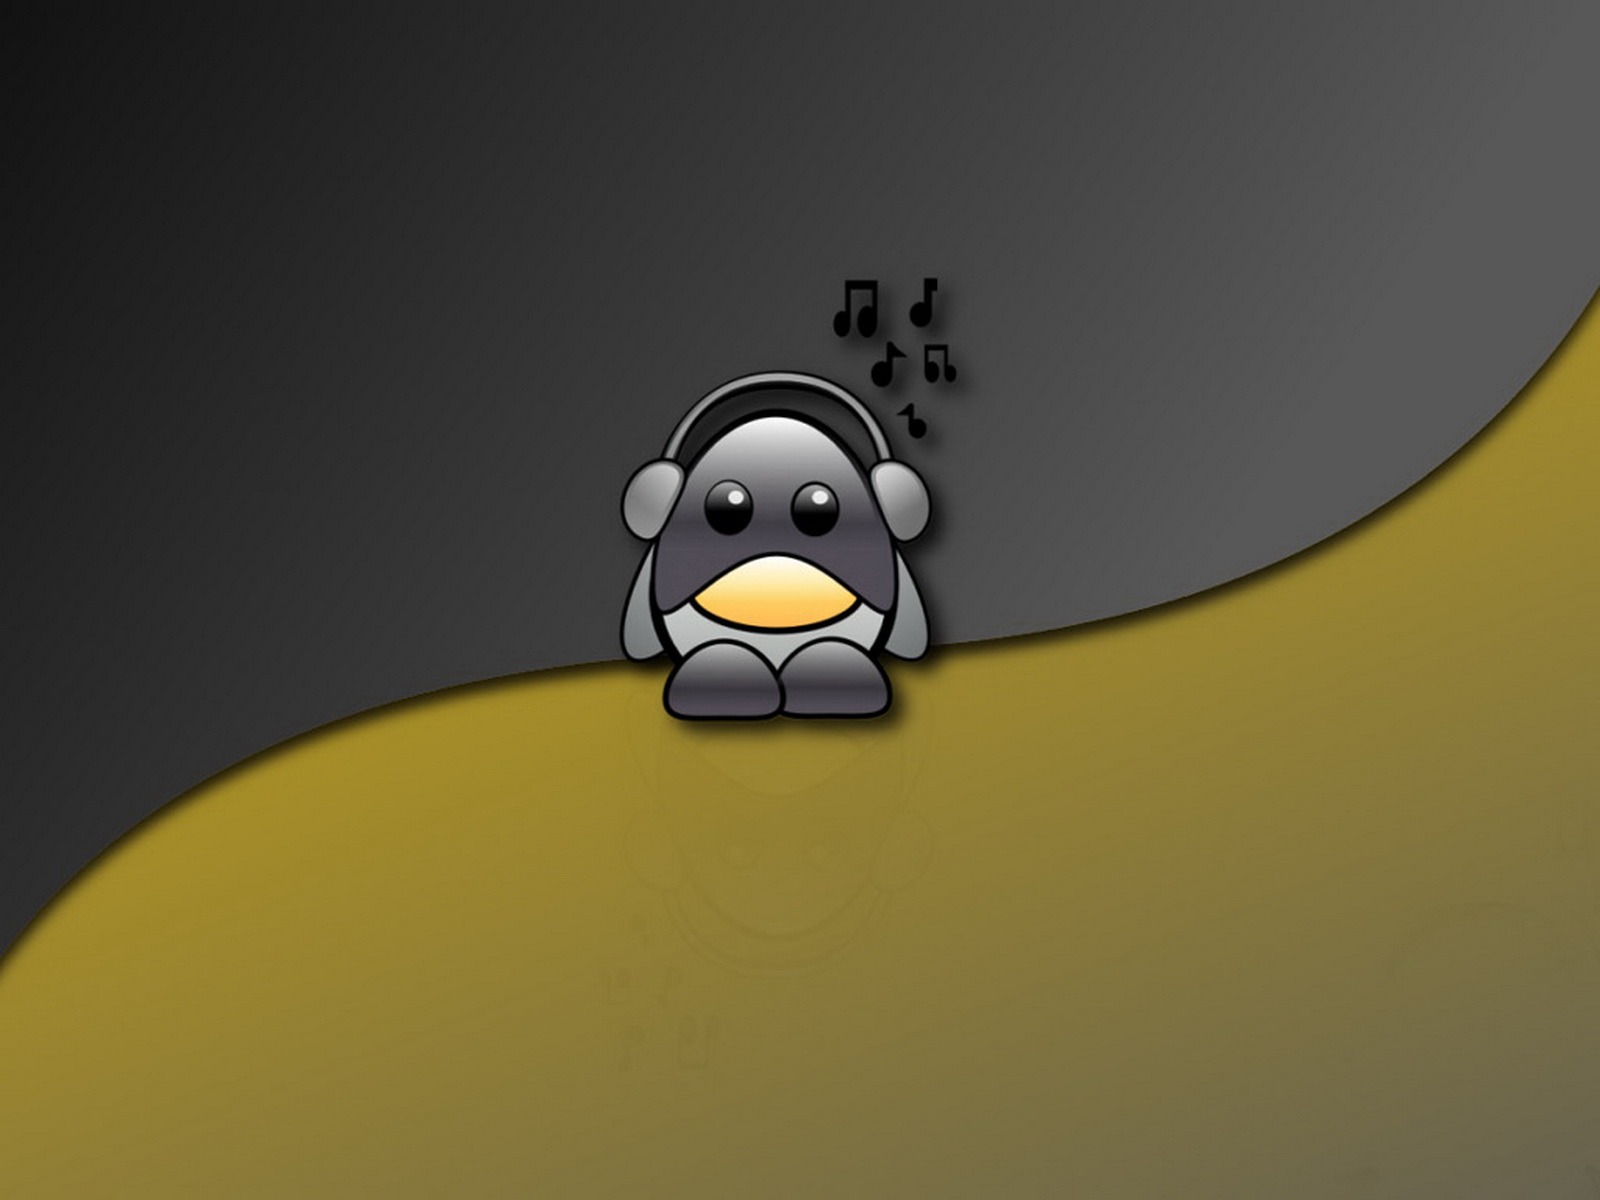 Linux tapety (2) #13 - 1600x1200